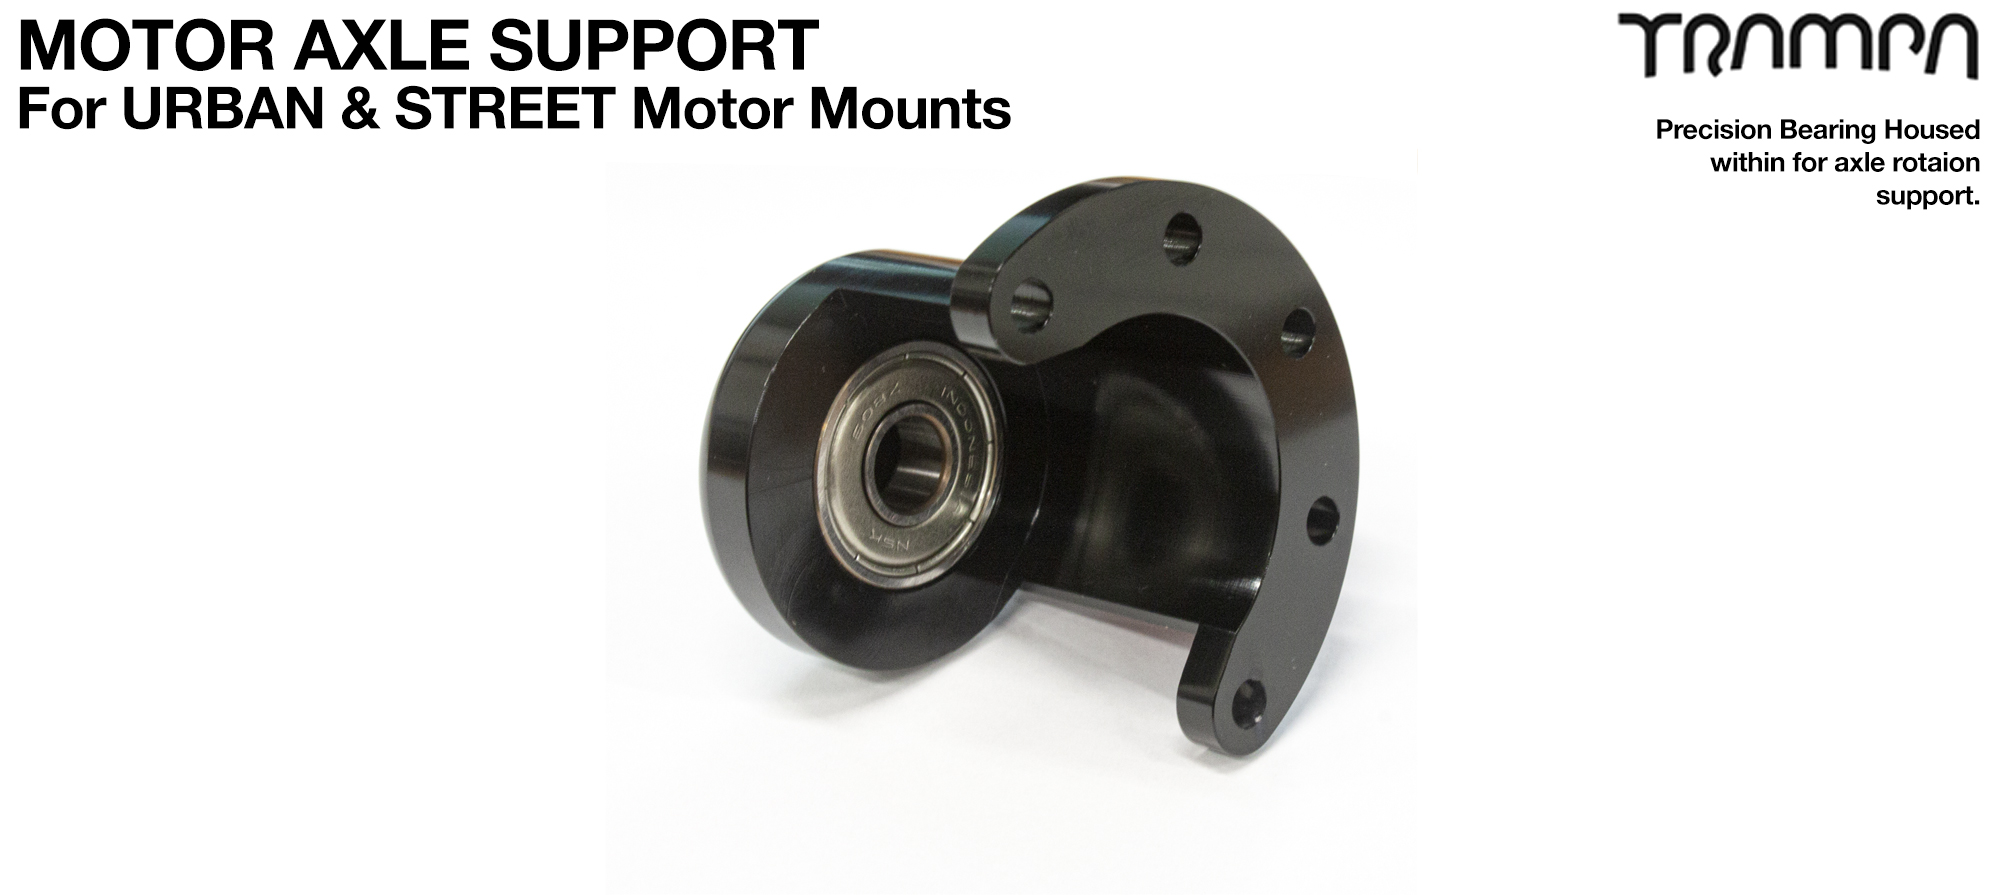 UNIVERSAL Motor Axle Support for CARVE Motor Mounts - CARBON